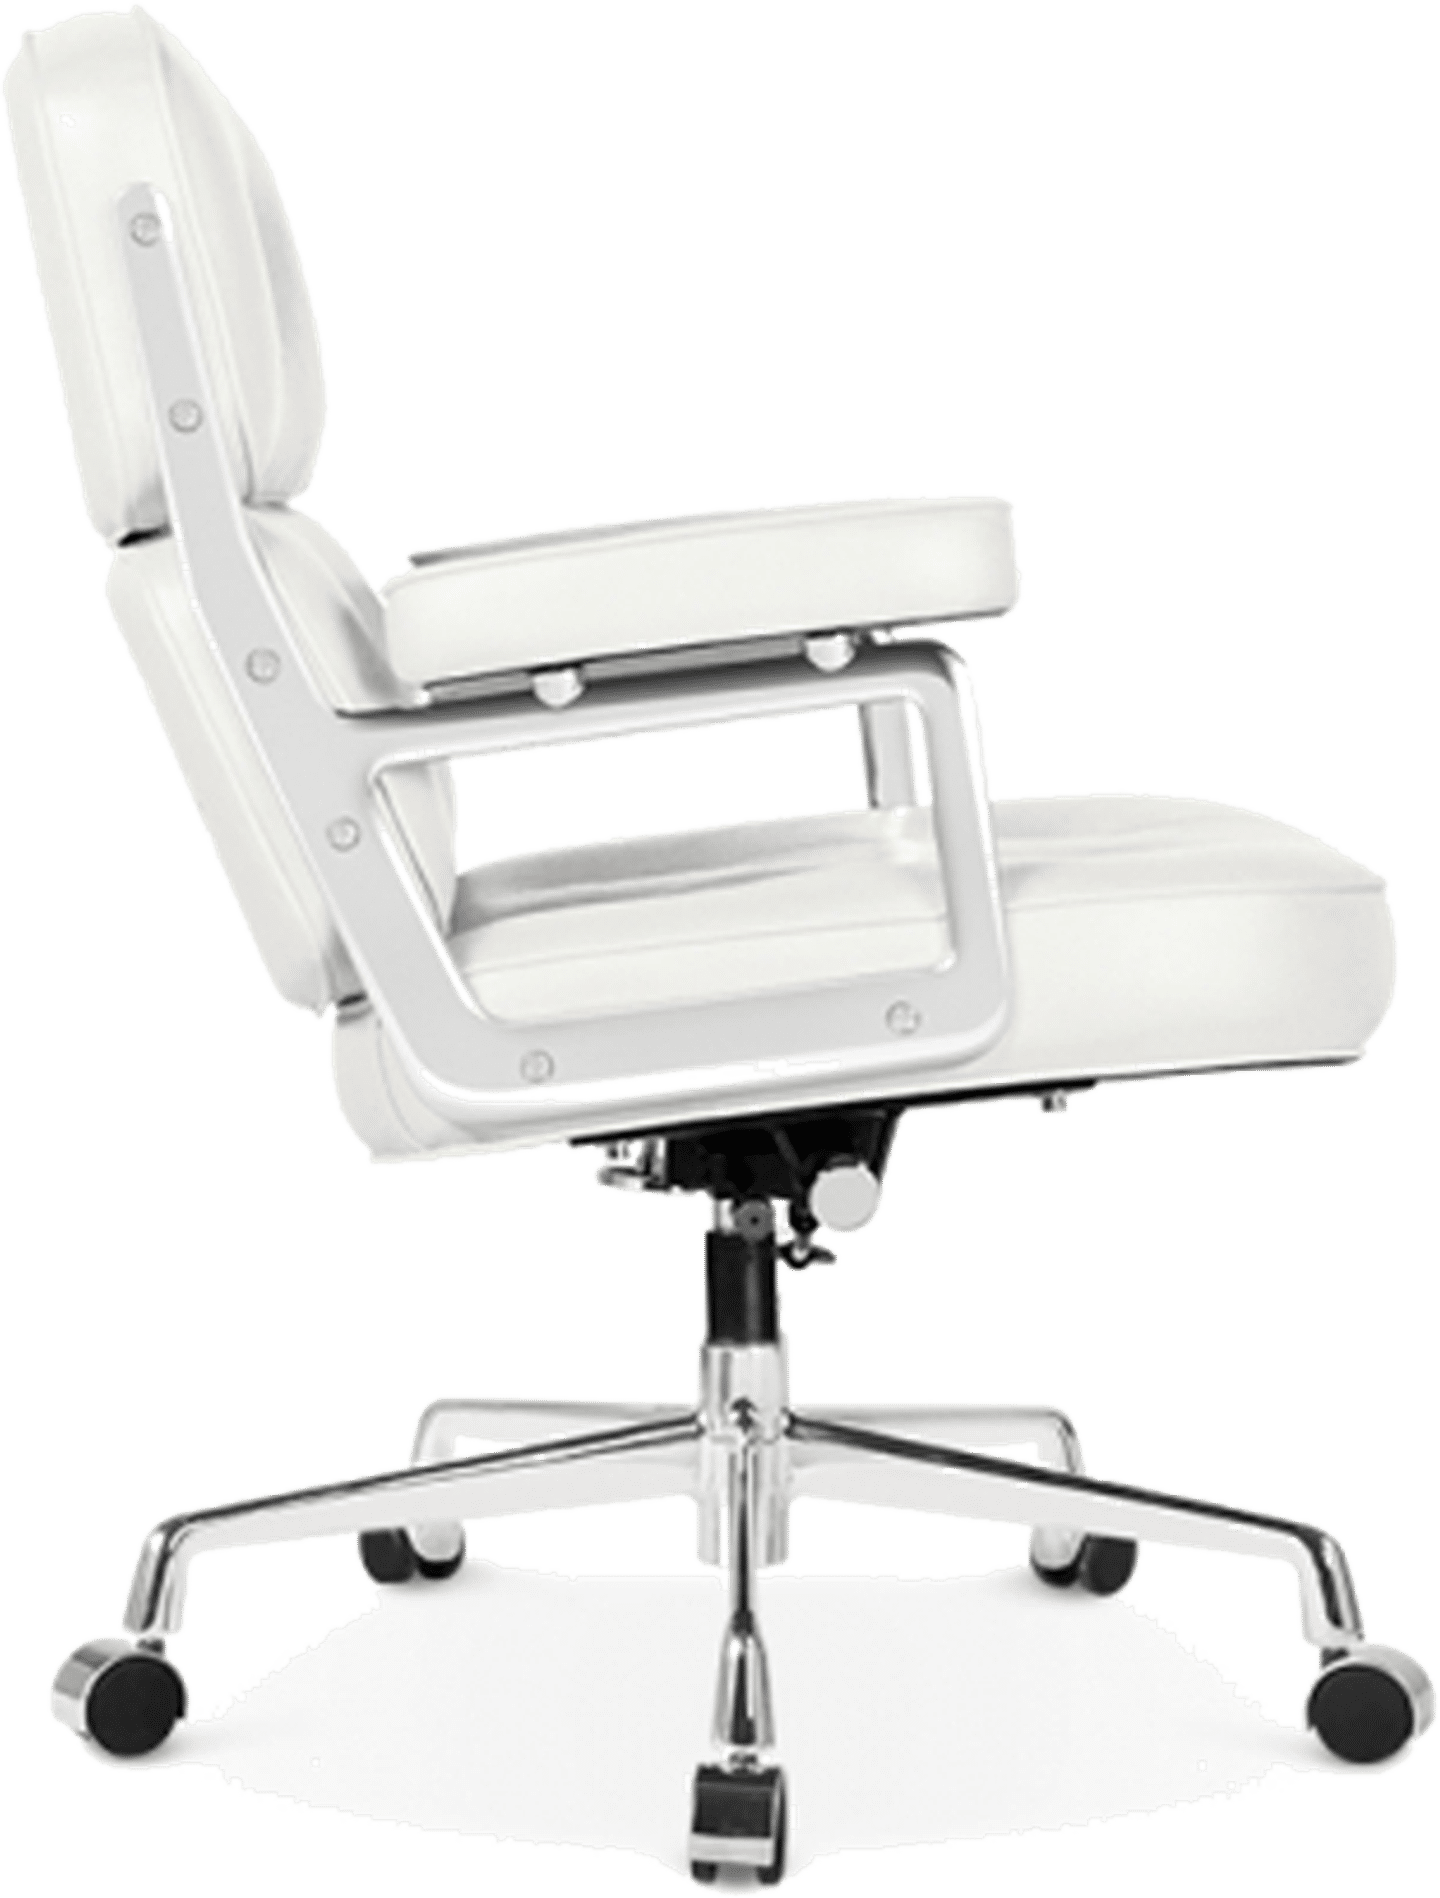 Eames Style ES104 Lobby Chair White image.